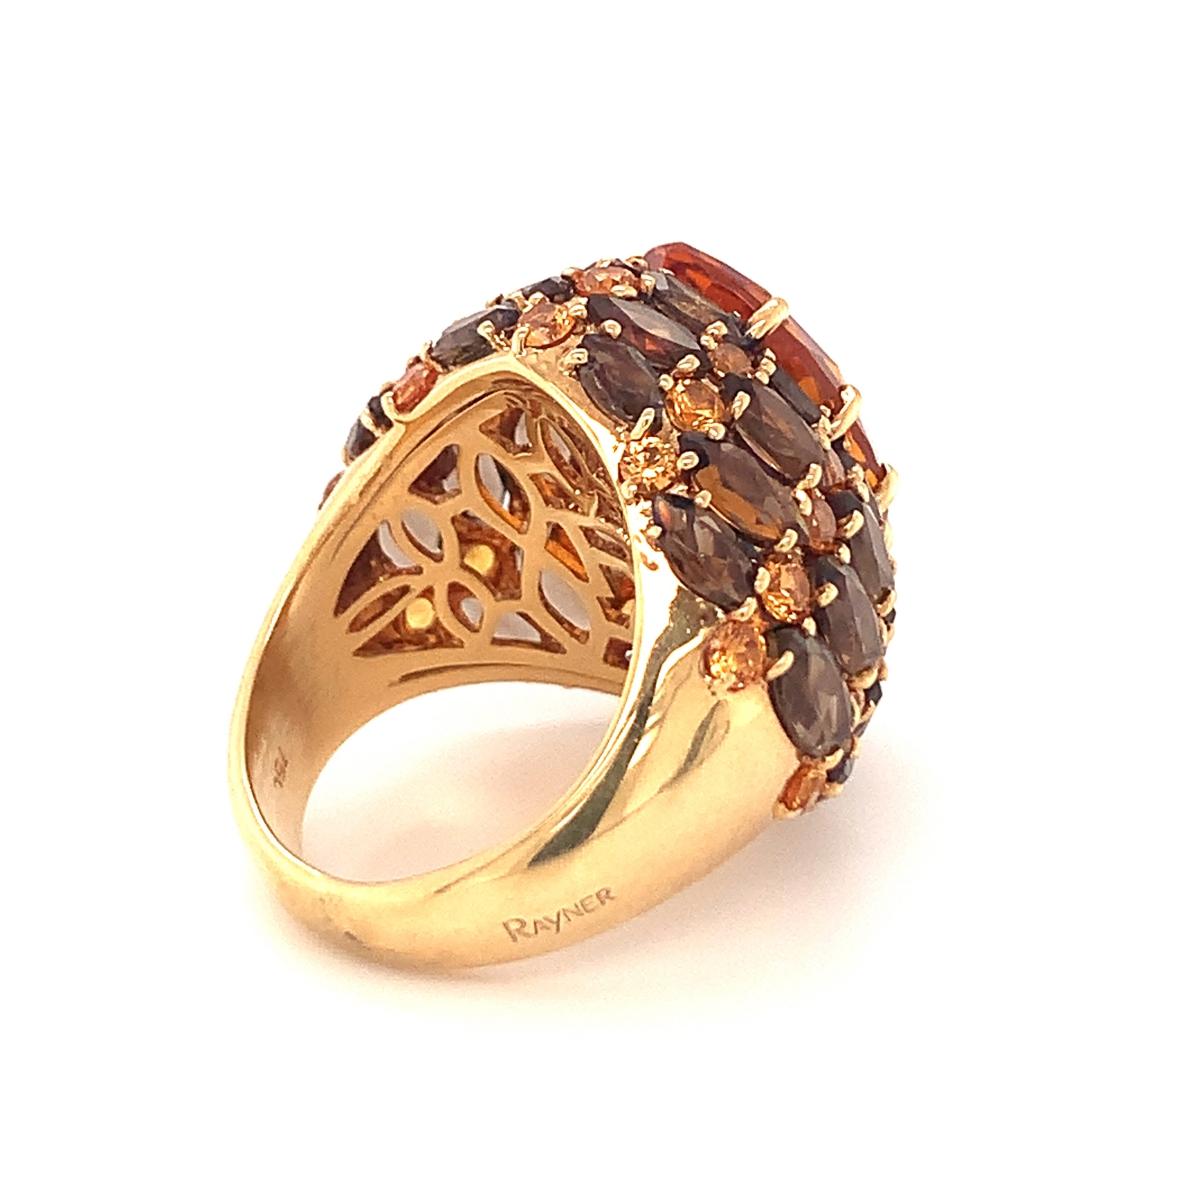 Citrine, Quartz and Orange Sapphire 18K Gold Ring by Rodney Rayner, circa 2010 In Good Condition For Sale In Beverly Hills, CA